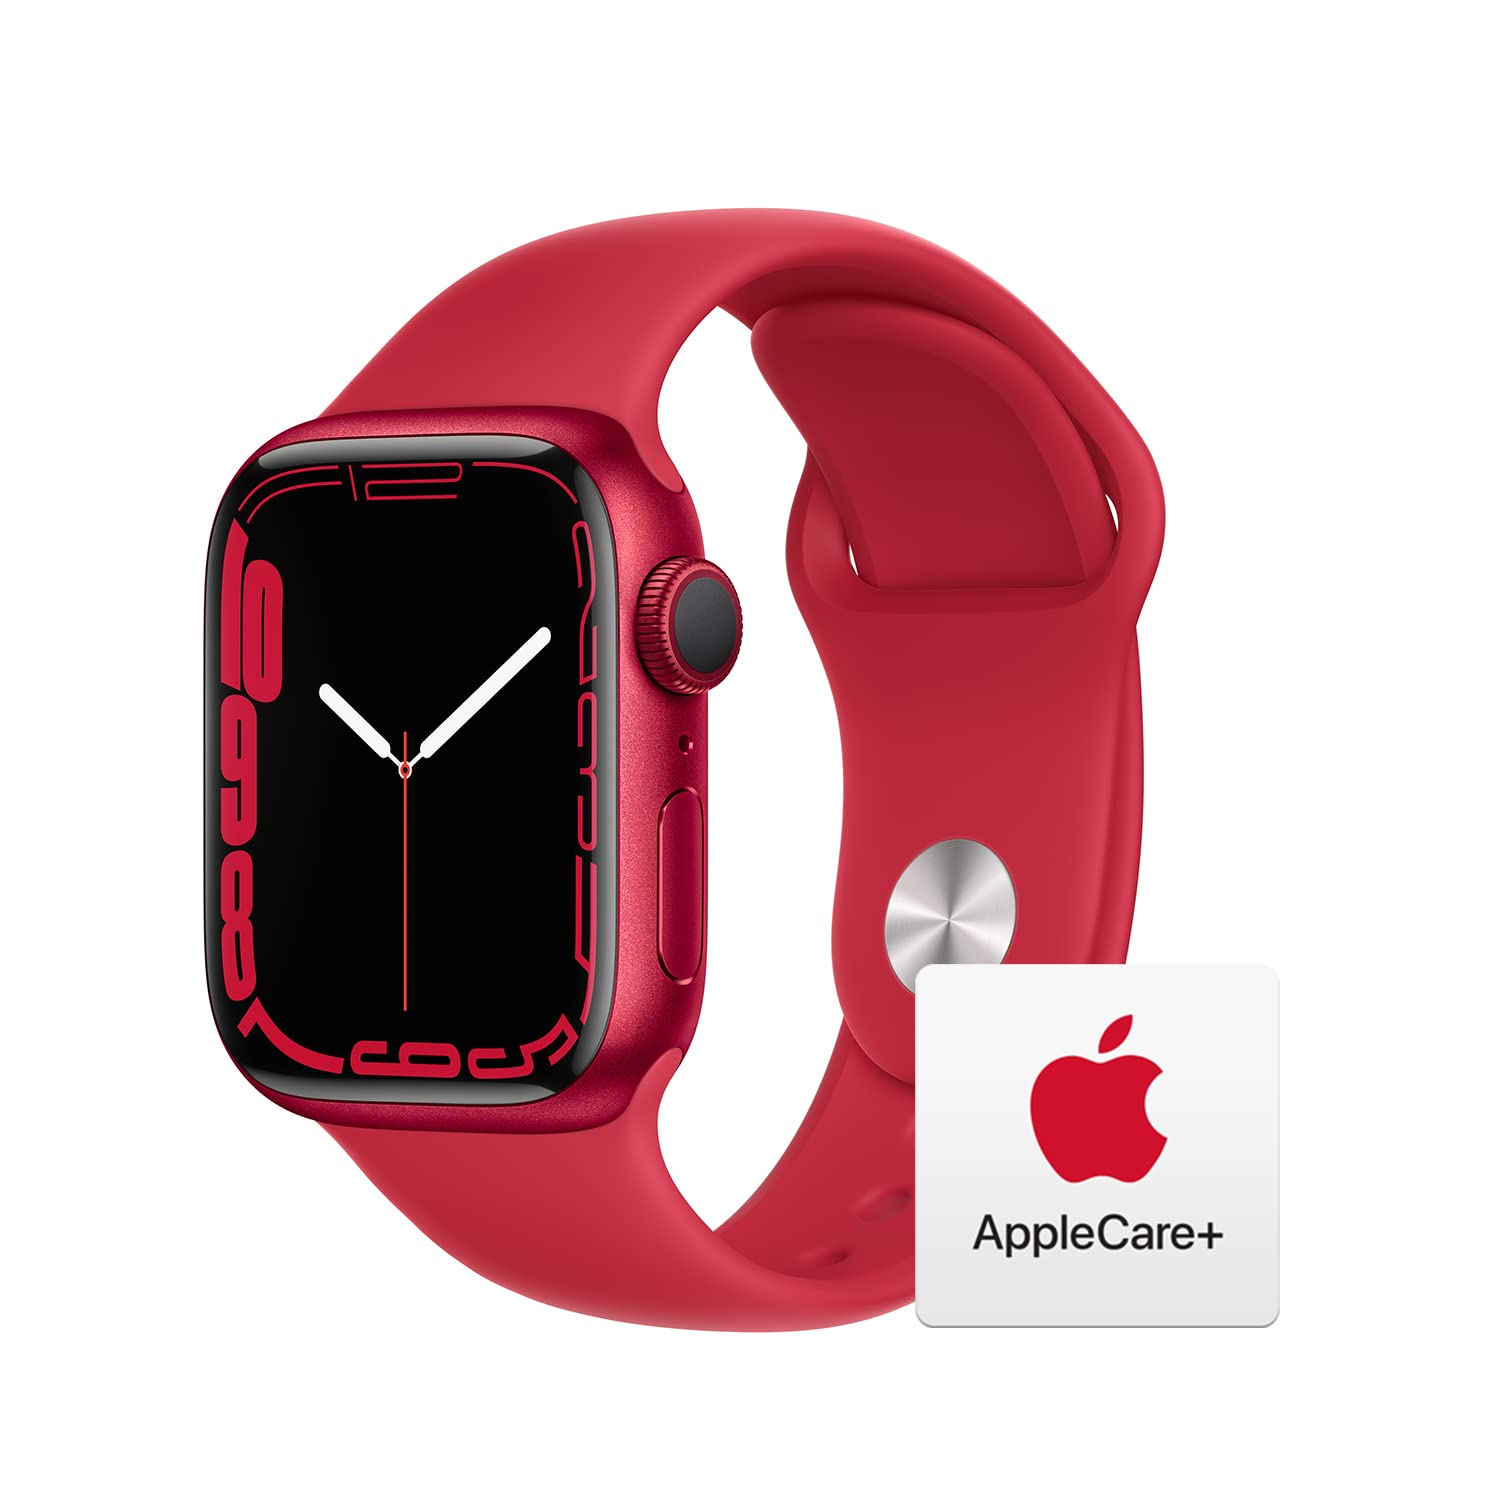 Apple Watch Series 7 [GPS 41mm] Smart Watch w/ (Product) RED Aluminum Case with (Product) RED Sport Band. Fitness Tracker, Blood Oxygen & ECG Apps, Always-On Retina Display, Water Resistant AppleCare